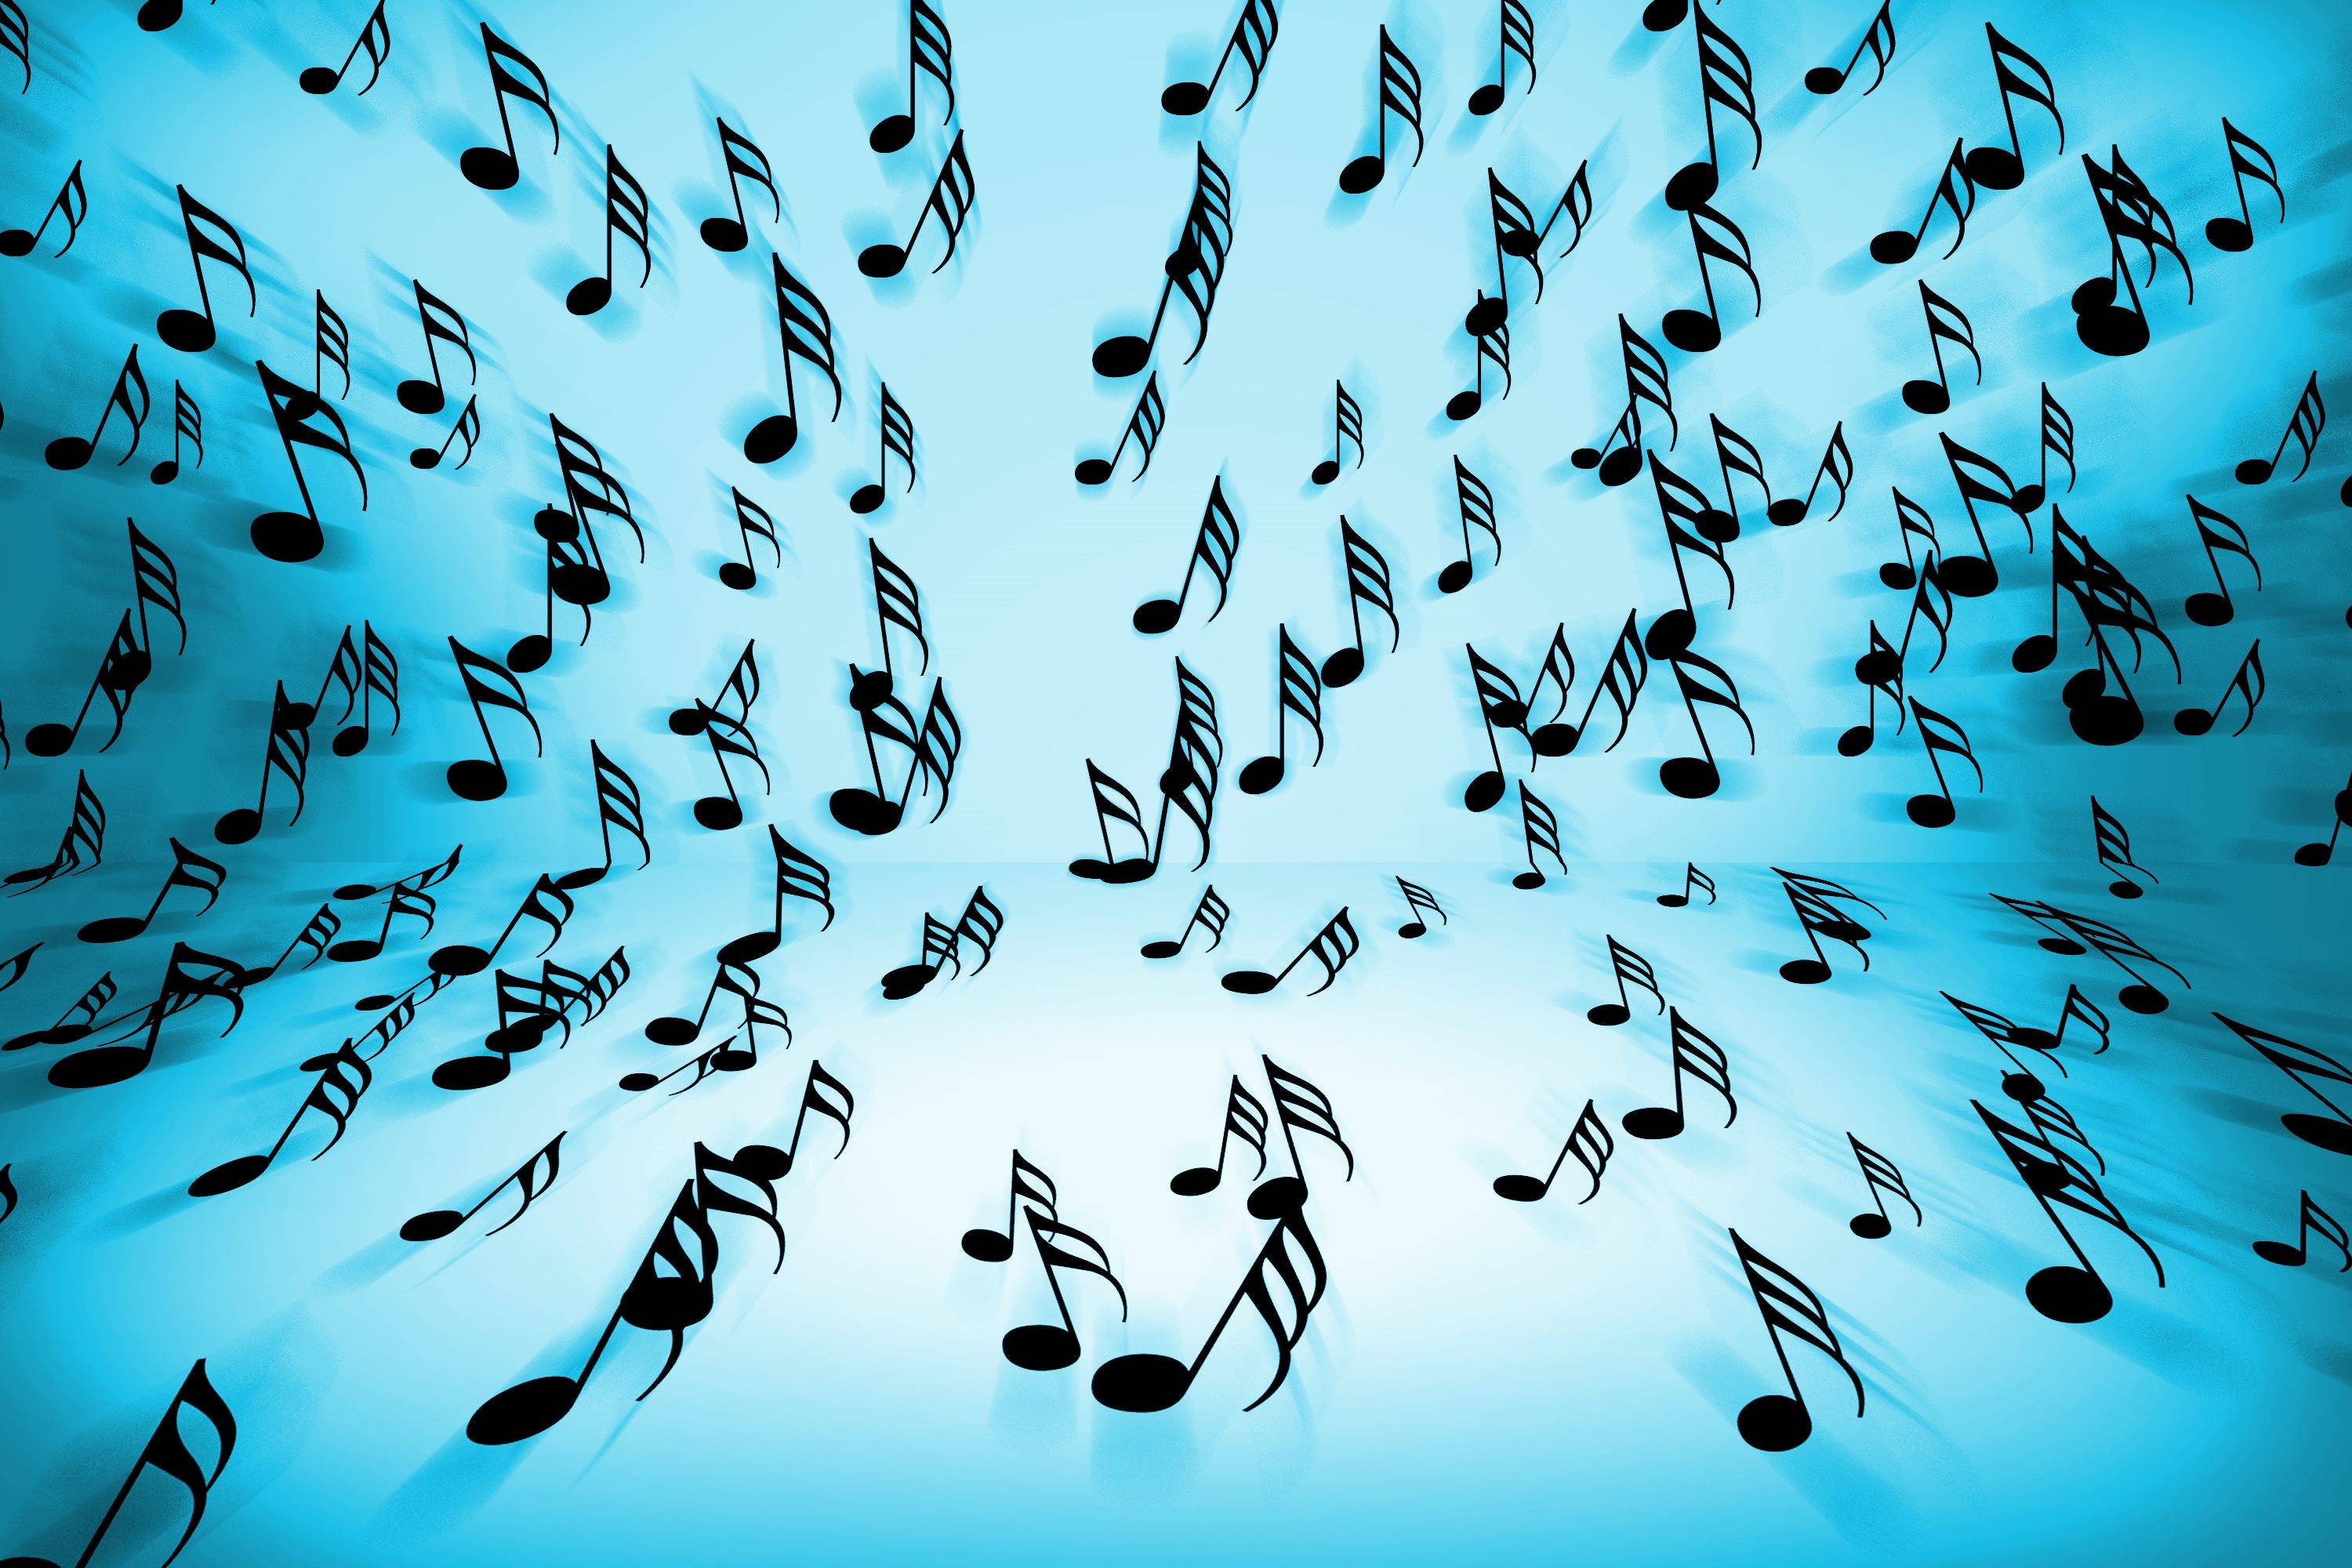 download free background music